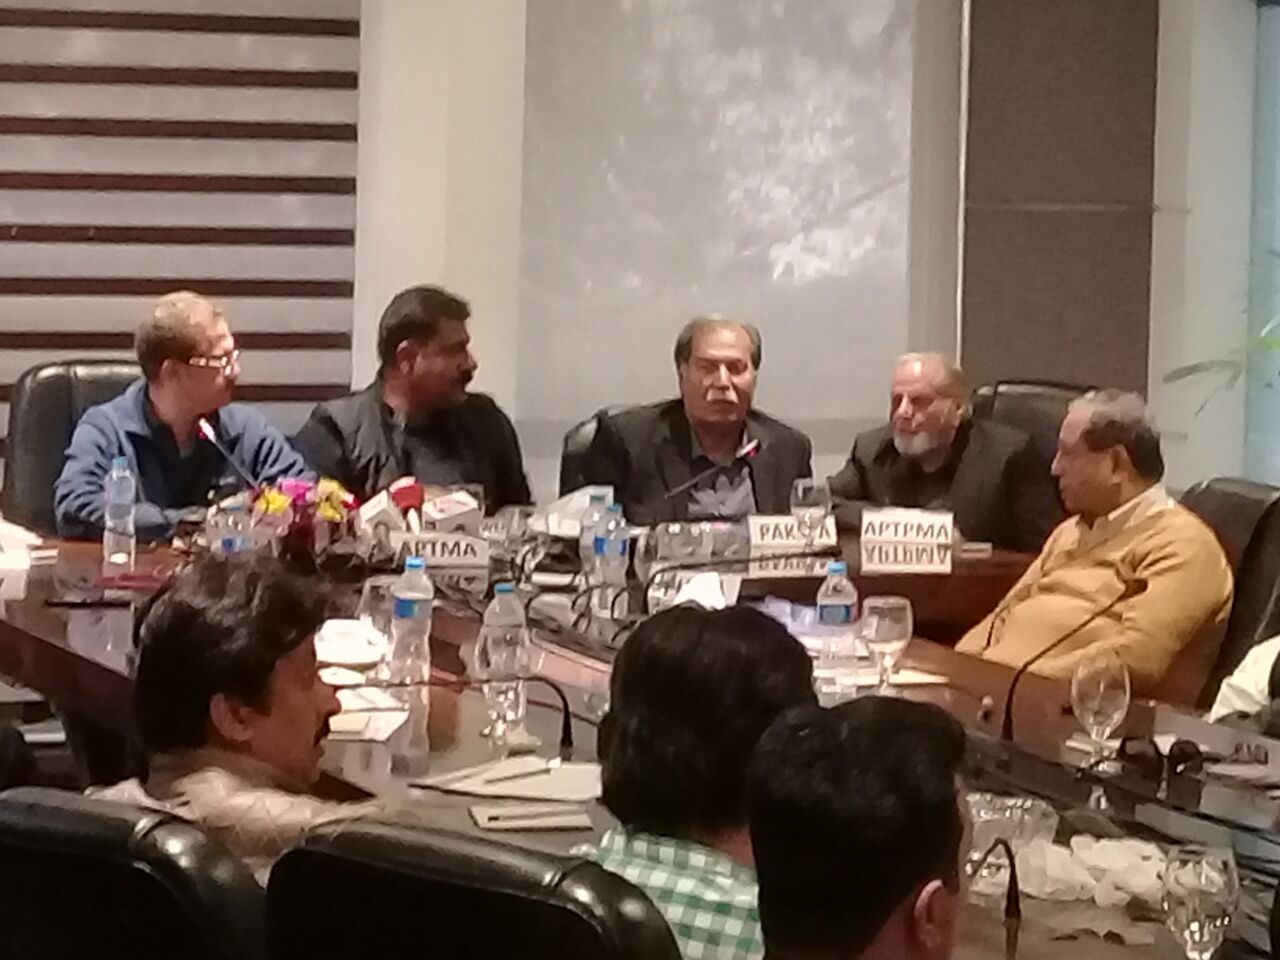 https://aptma.org.pk/wp-content/uploads/2021/10/Joint-Meeting-of-the-Textile-Industry-Associations-72.jpg